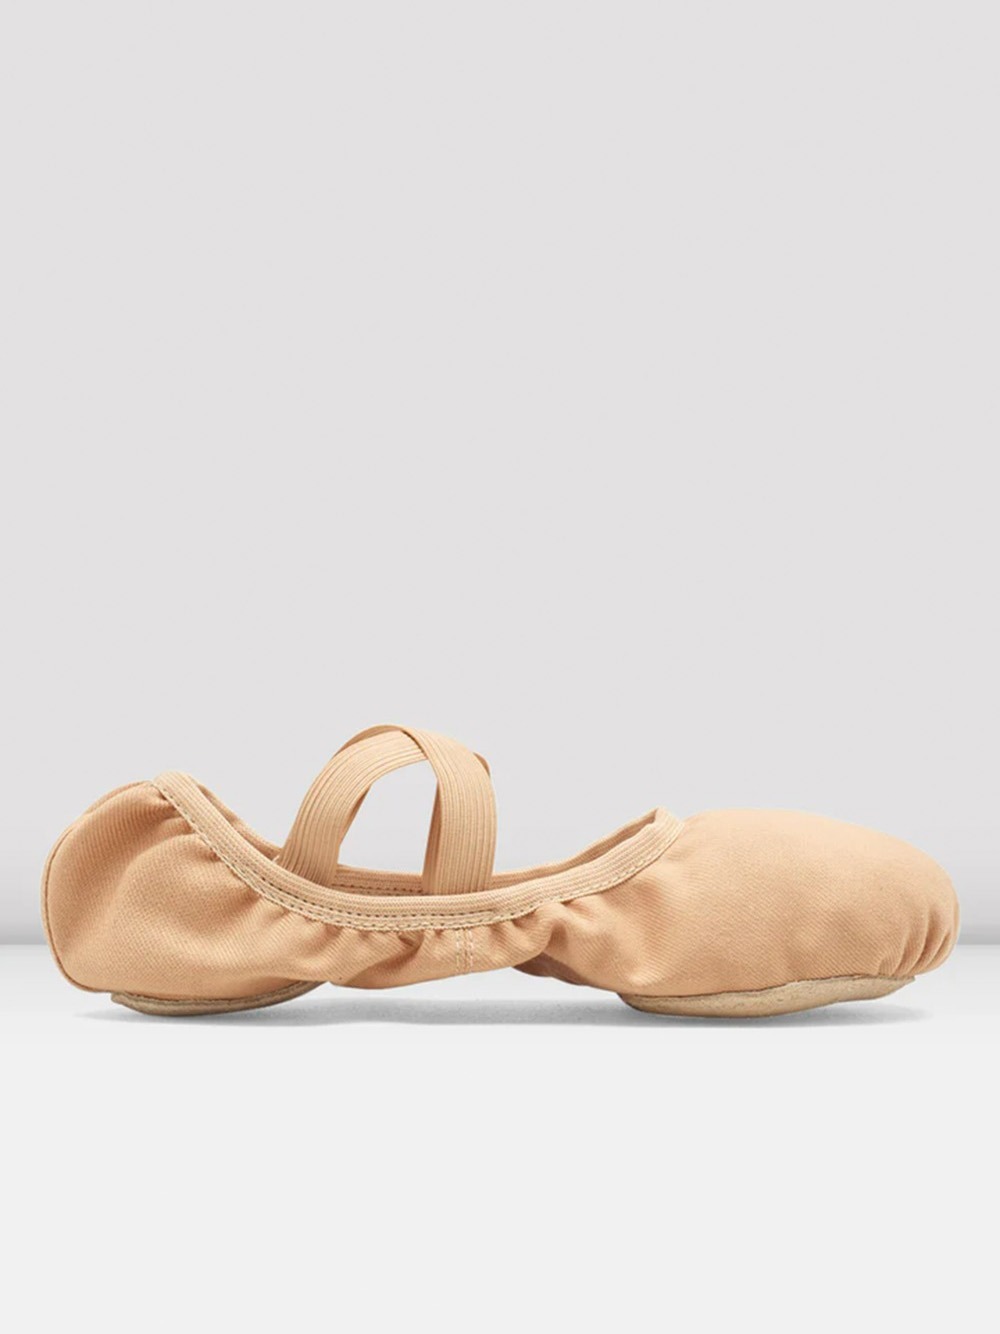 PERFORMA STRETCH CANVAS BALLET SHOES - SAND - NISARAT